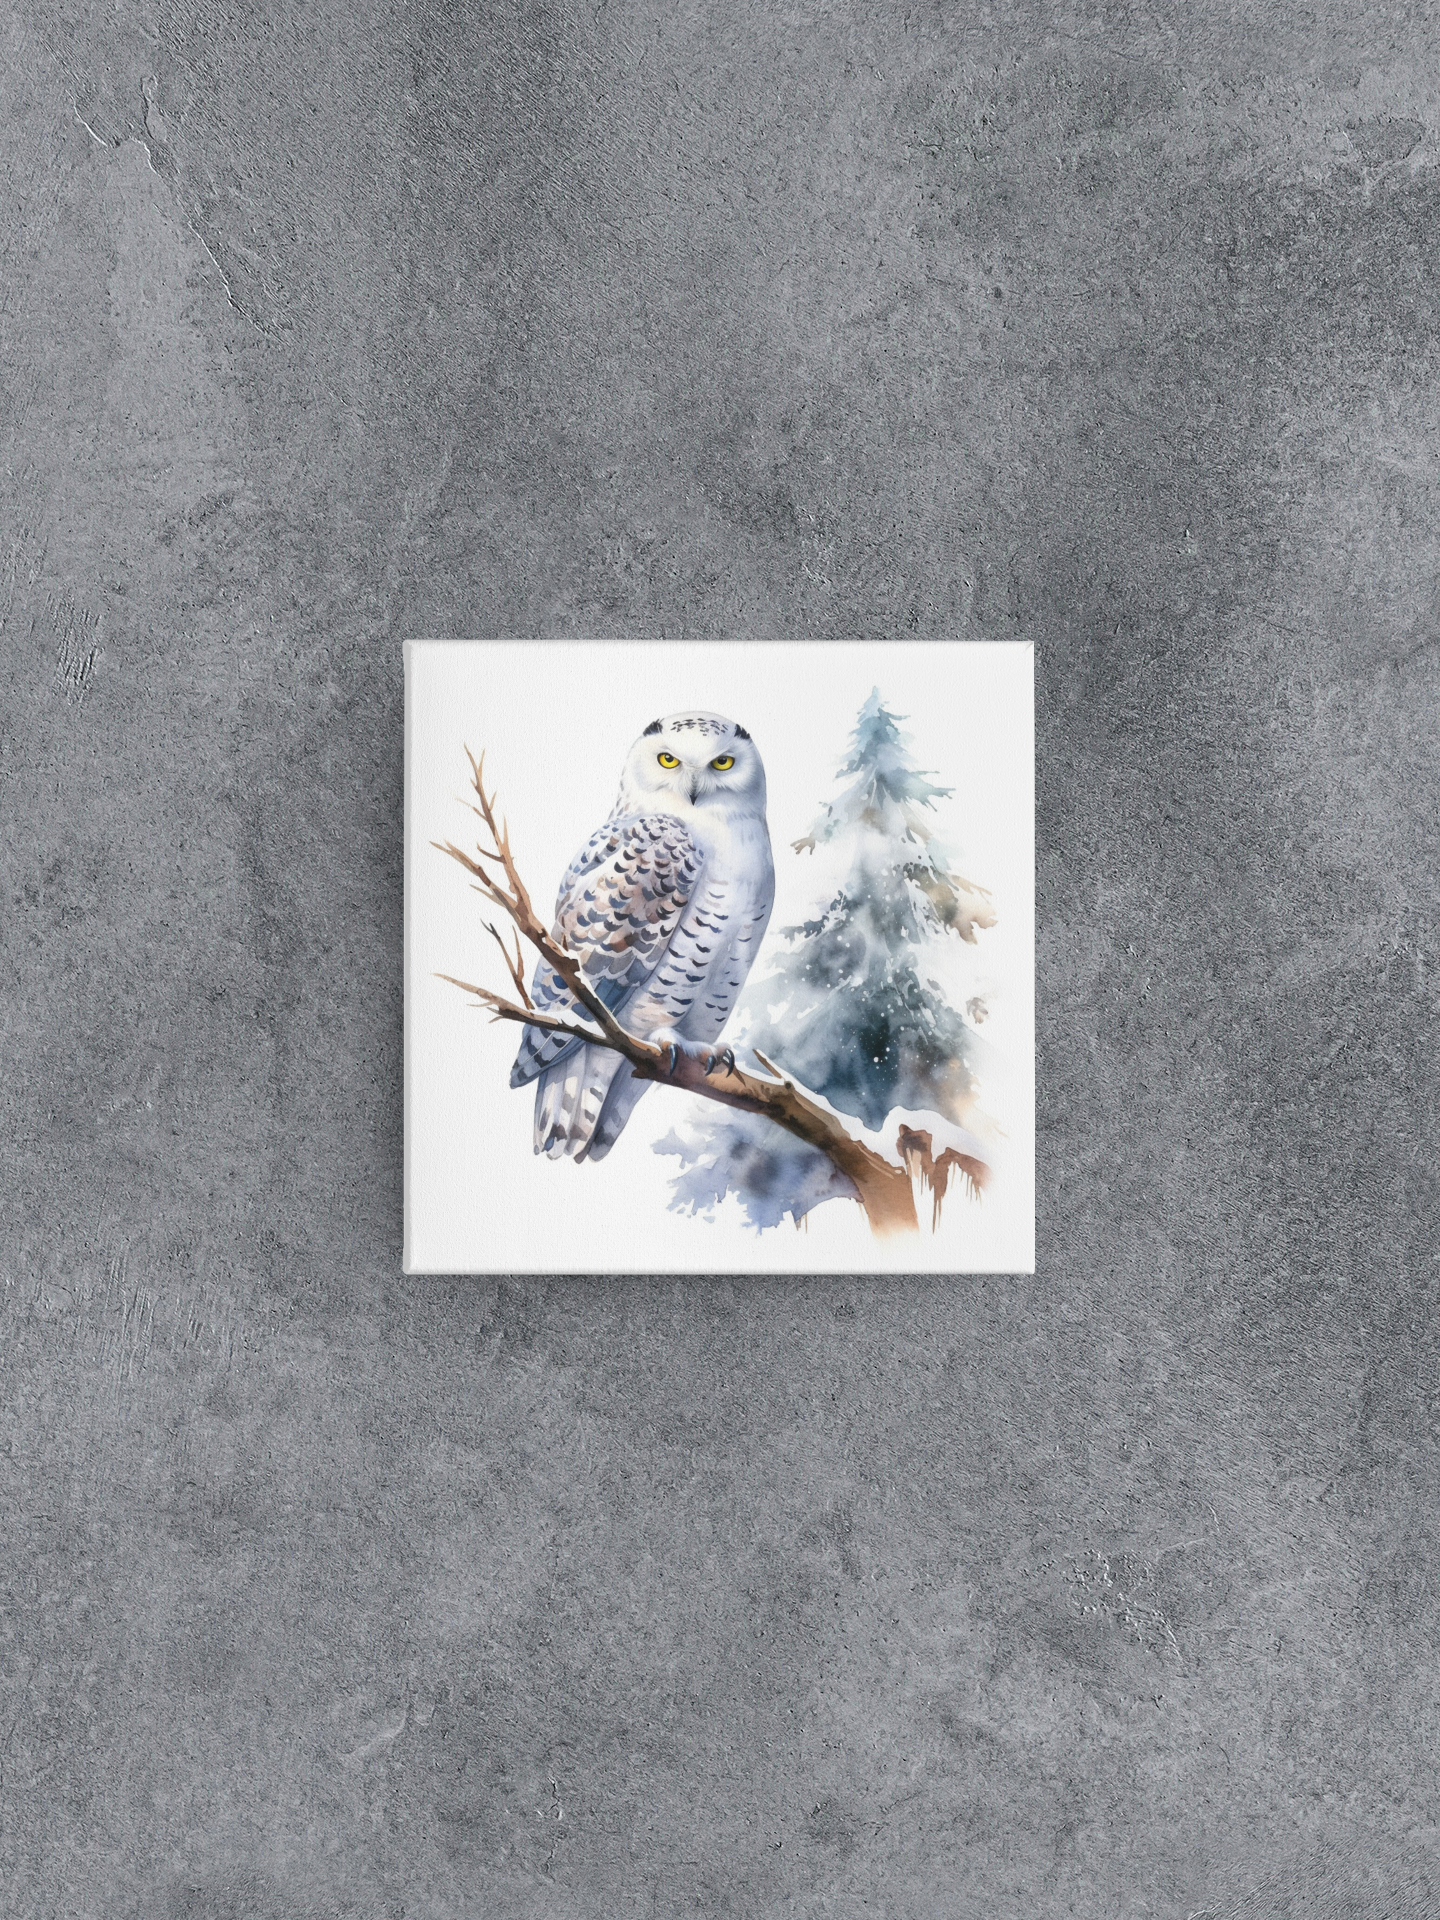 Snowy Owl Canvas Wall Art, Watercolor Painting of Snowy Owl on Branch, Nature Canvas Art, Bird Lover Gift, Ready to Hang